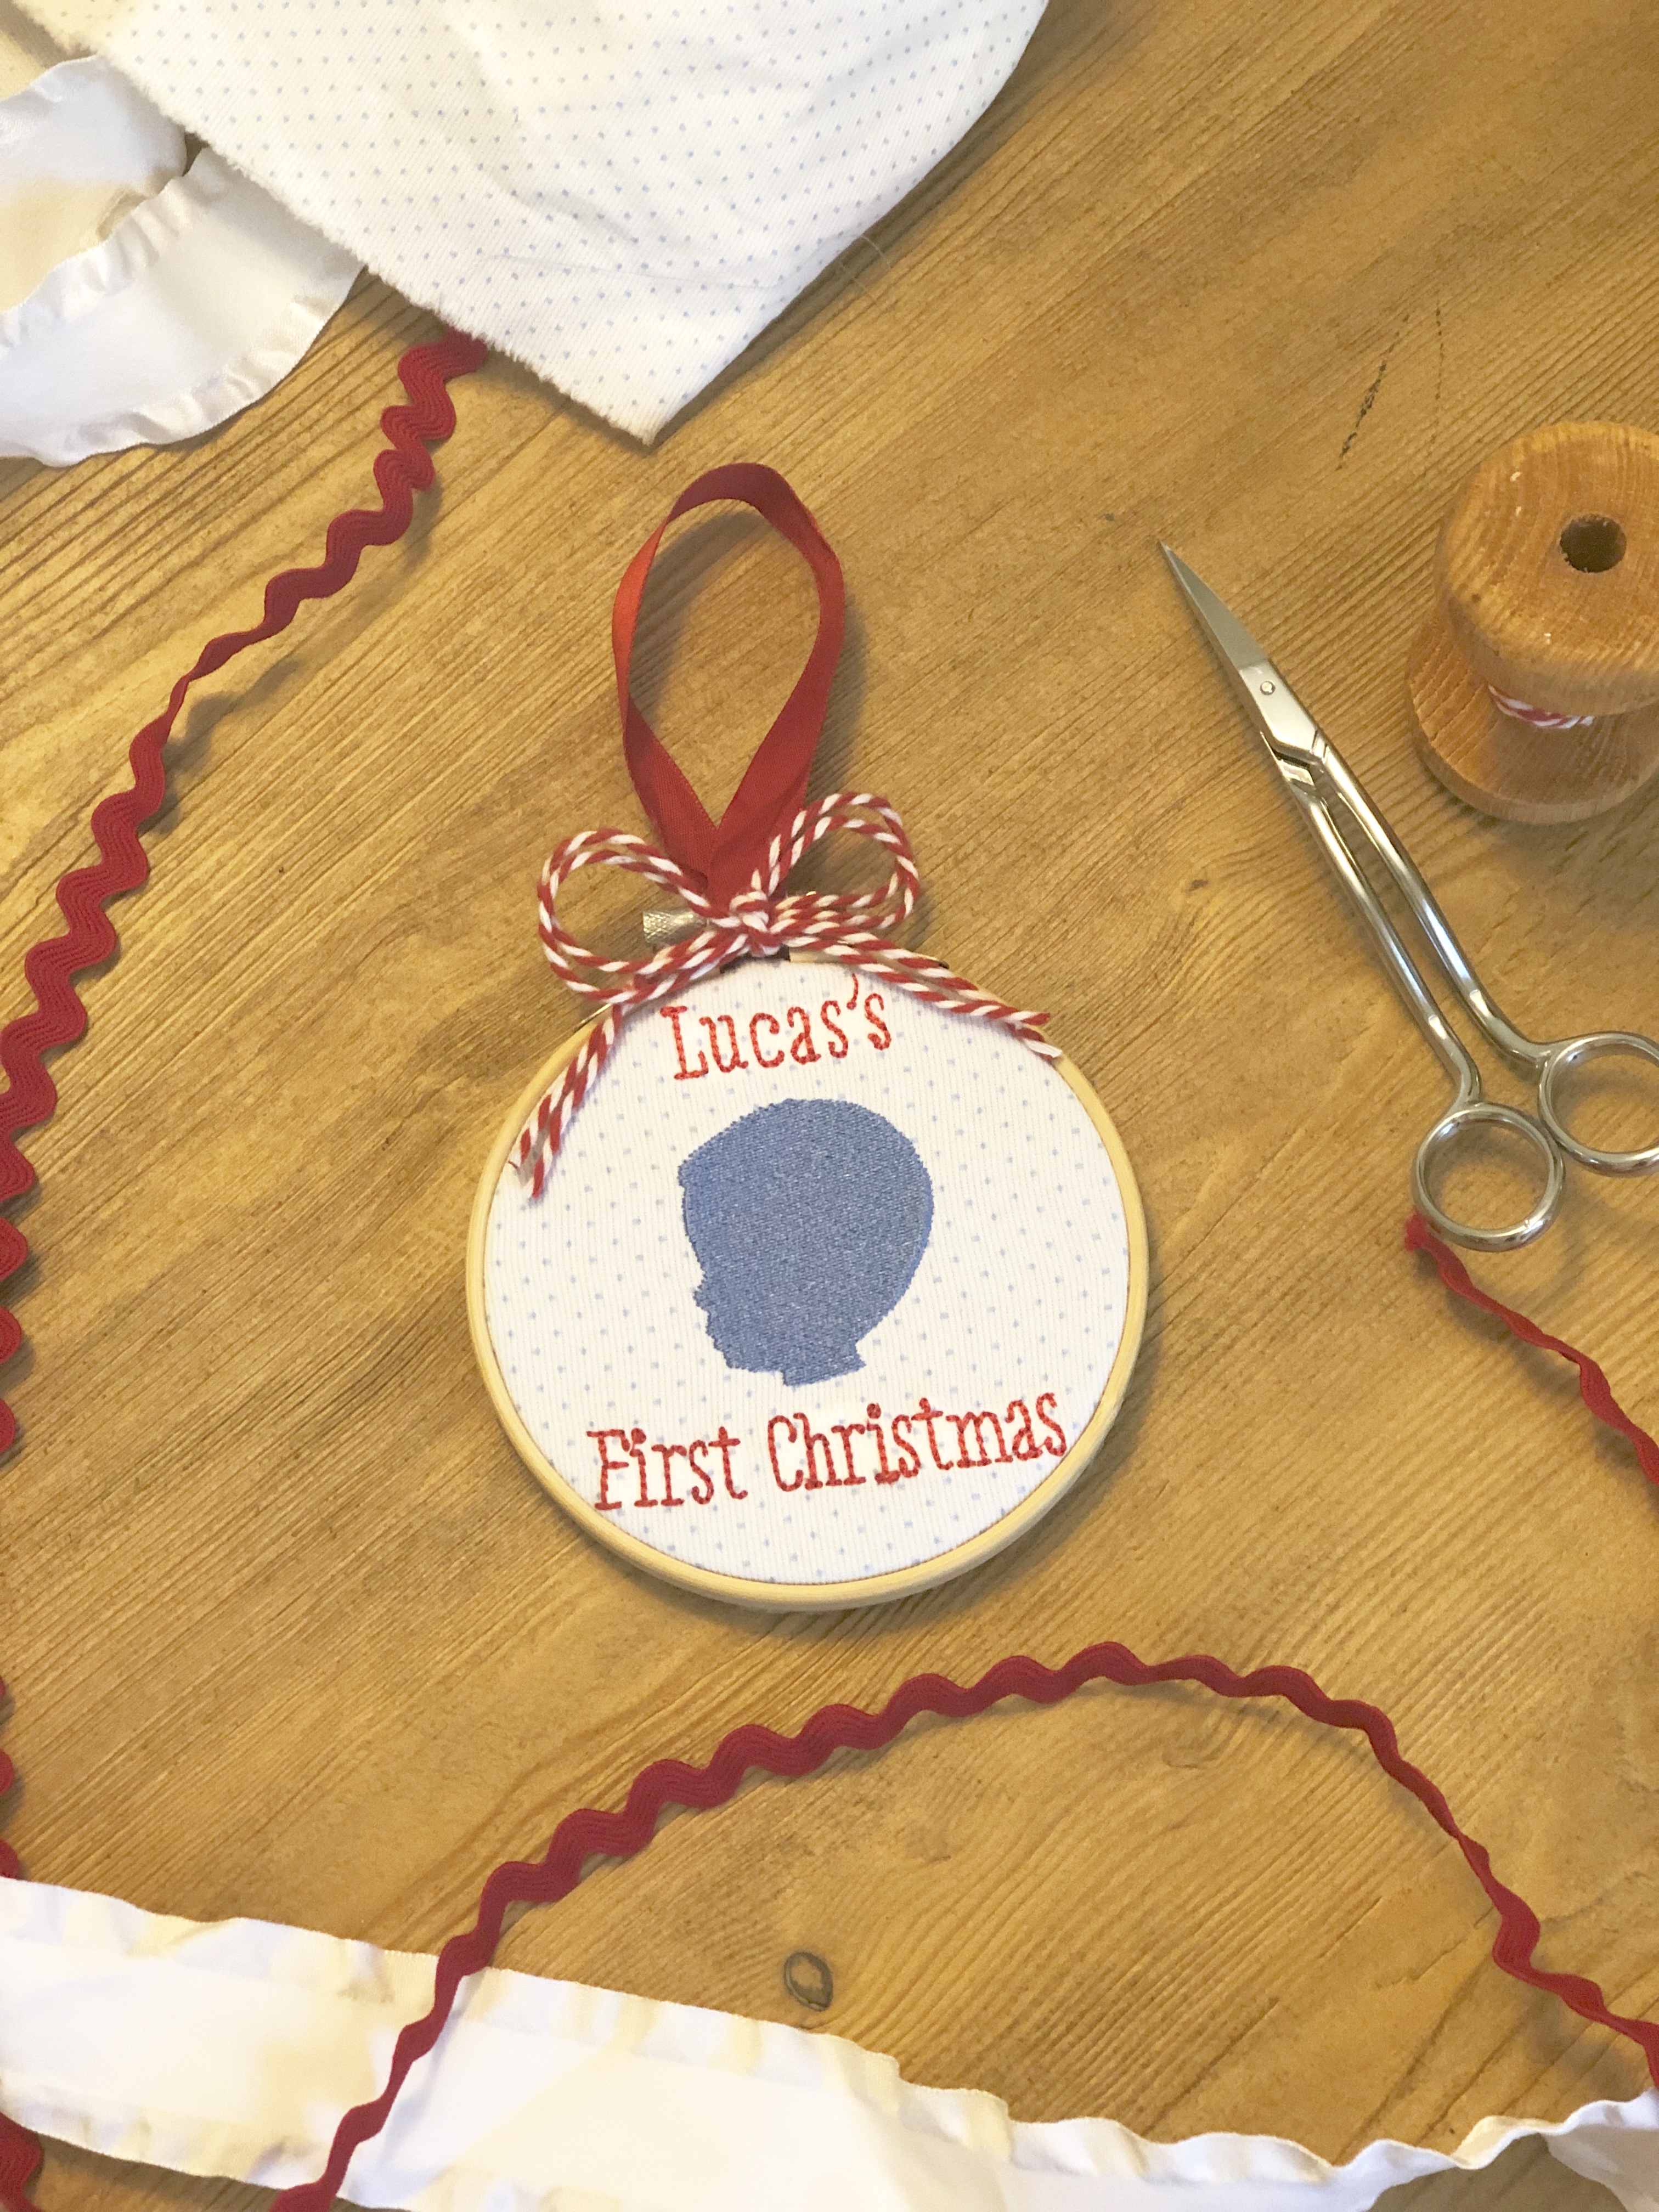 4 inch Embroidery Hoop Ornament, Life Is What Happens Between